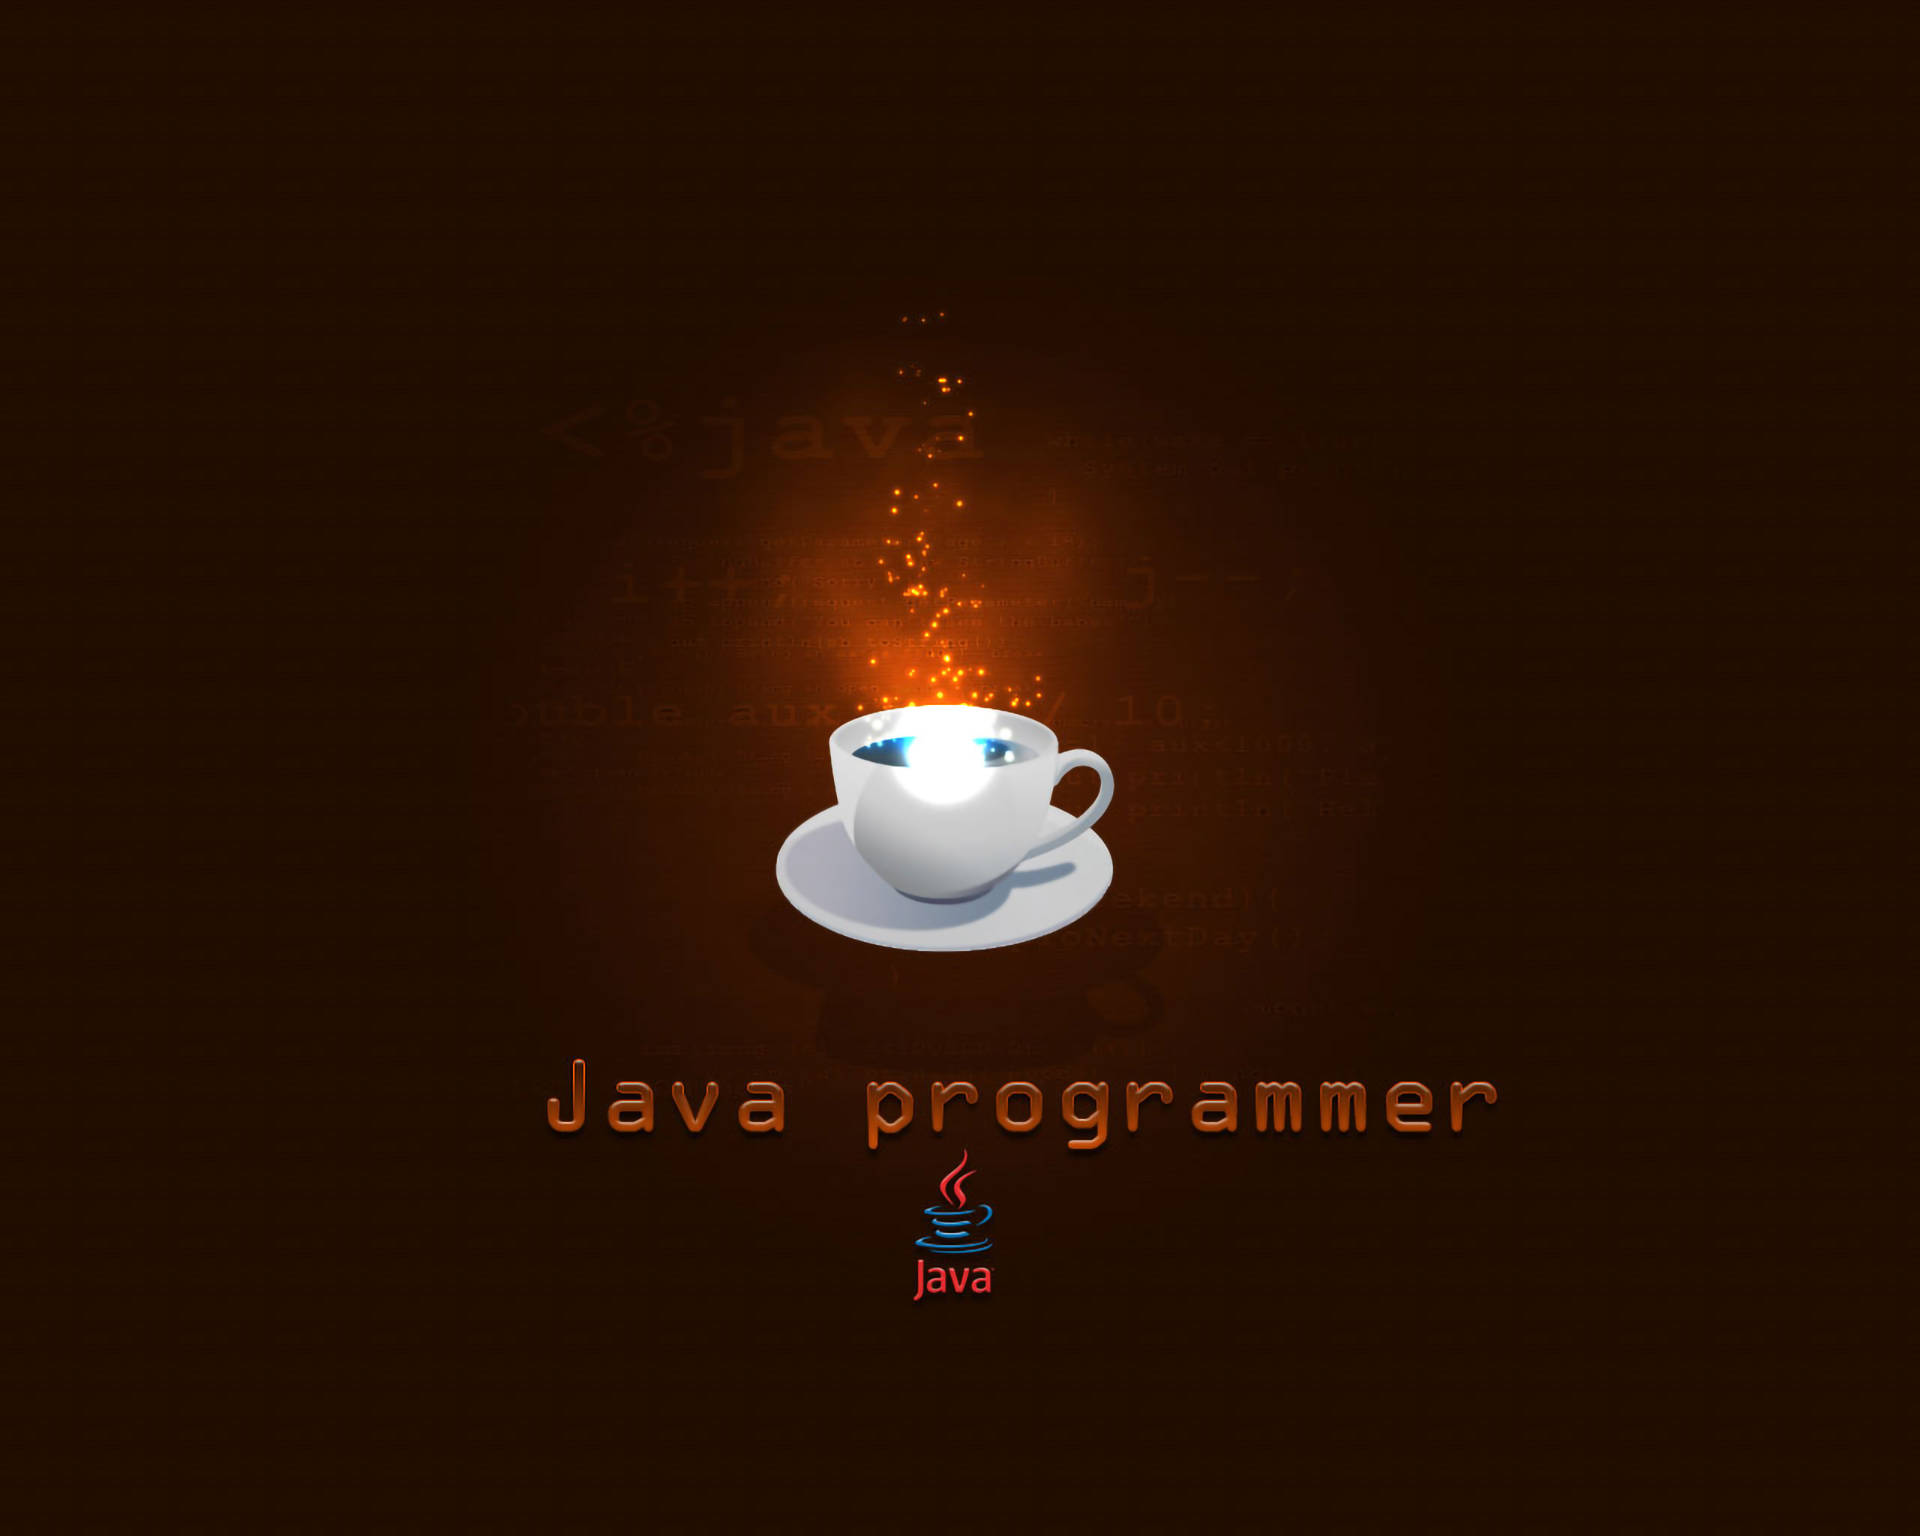 Java Programming With Glowing Cup Wallpaper